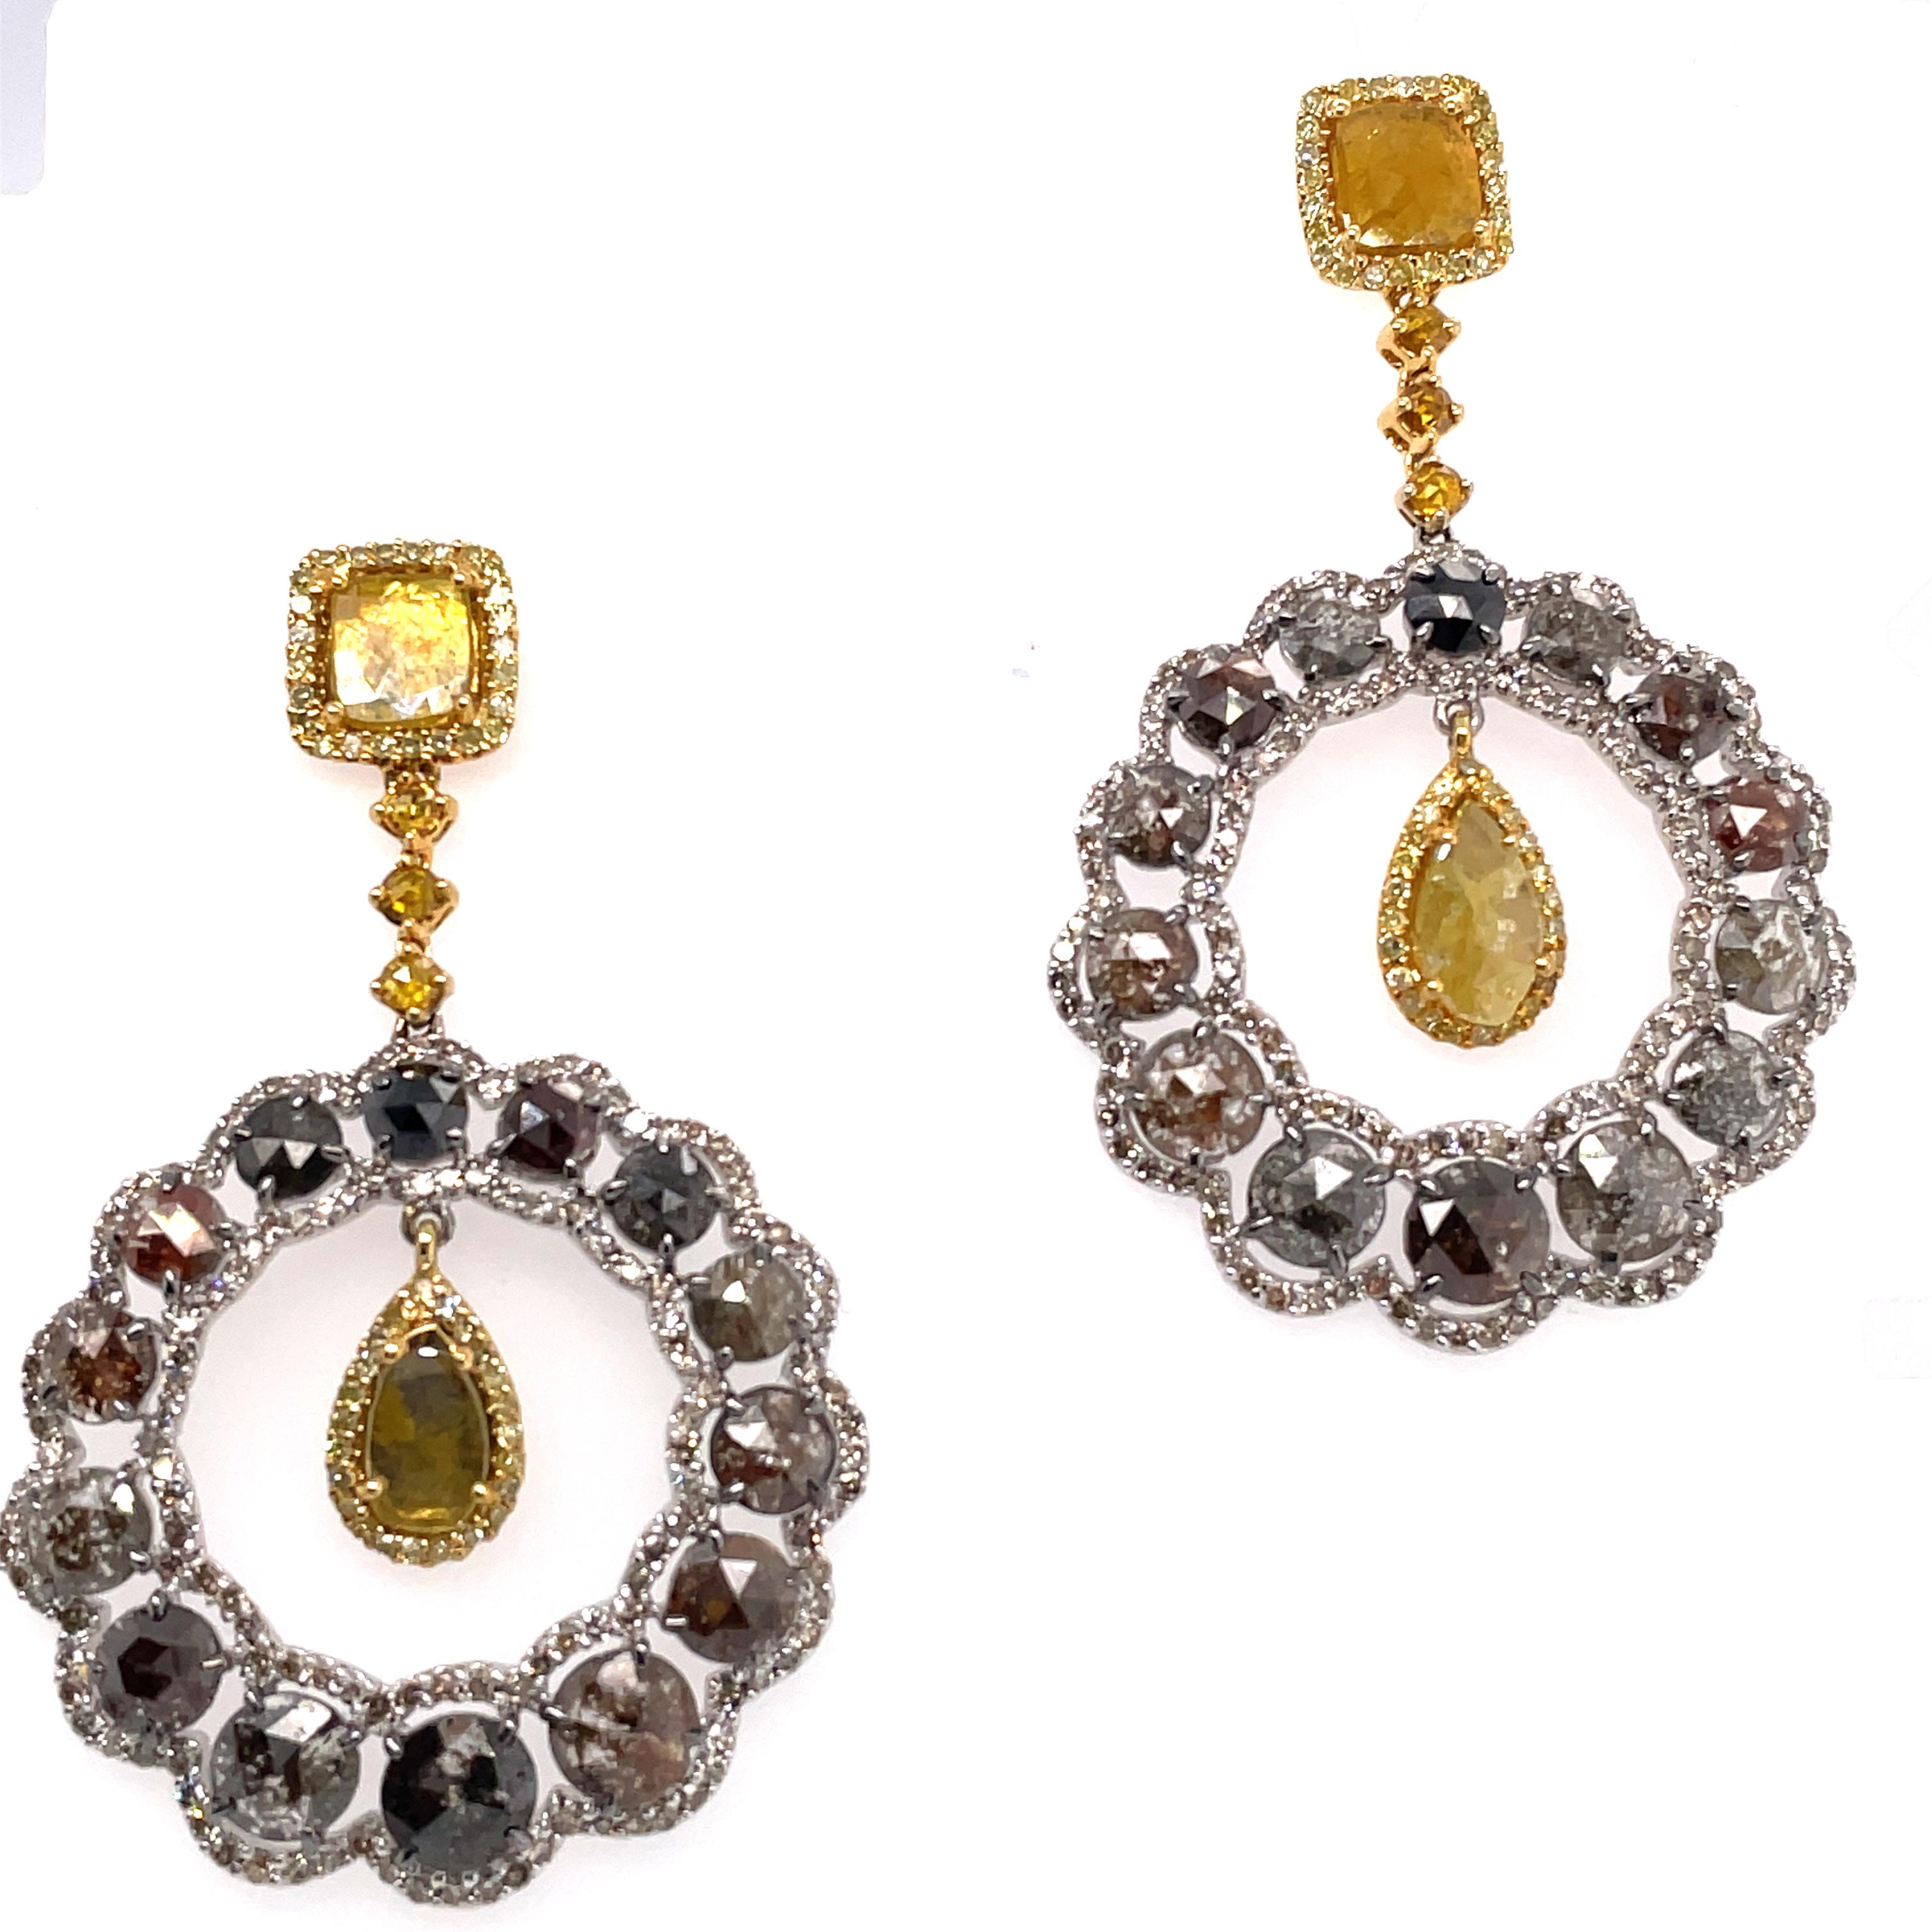 Mixed Cut 14Kt Yellow Gold and 14Kt White Gold 11.43 Carat Diamond Chandelier Earrings For Sale